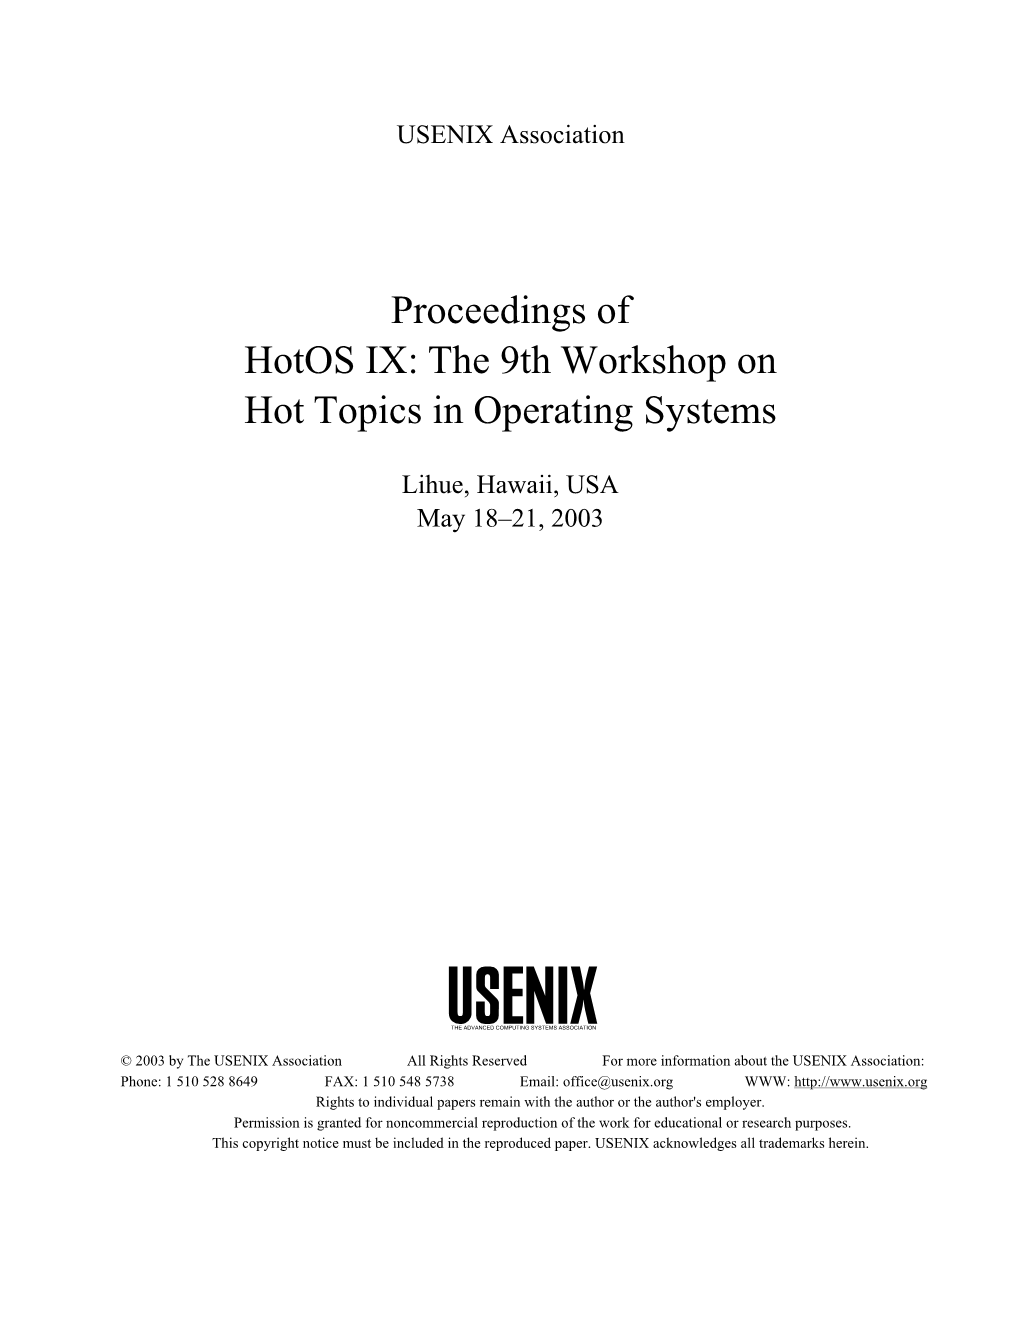 Proceedings of Hotos IX: the 9Th Workshop on Hot Topics in Operating Systems